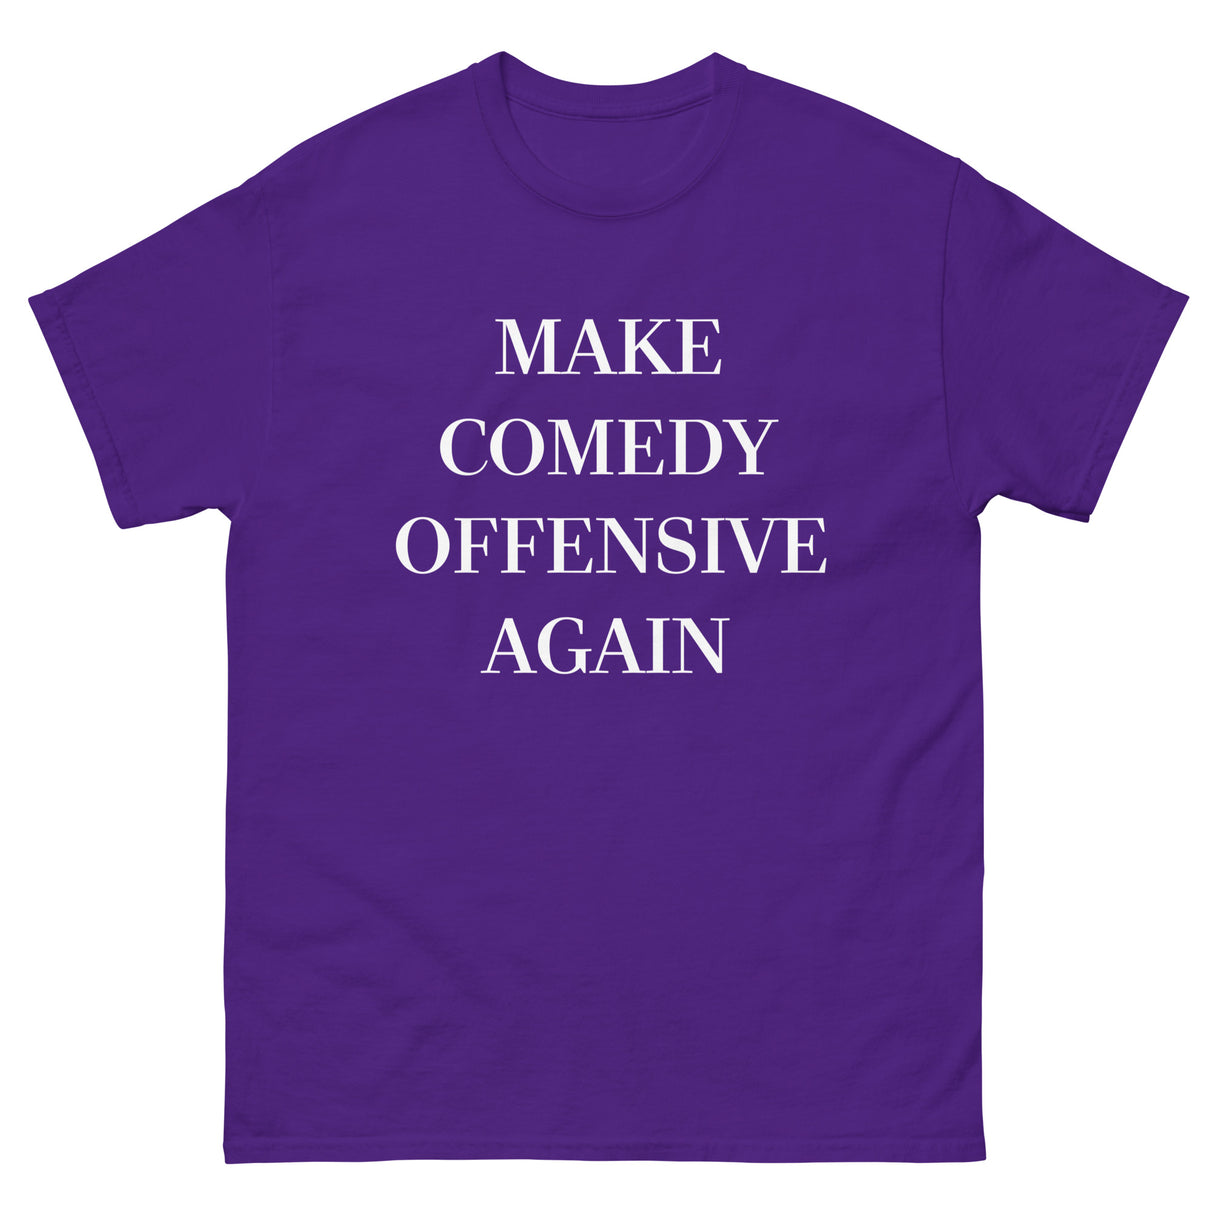 Make Comedy Offensive Again Heavy Cotton Shirt - Libertarian Country